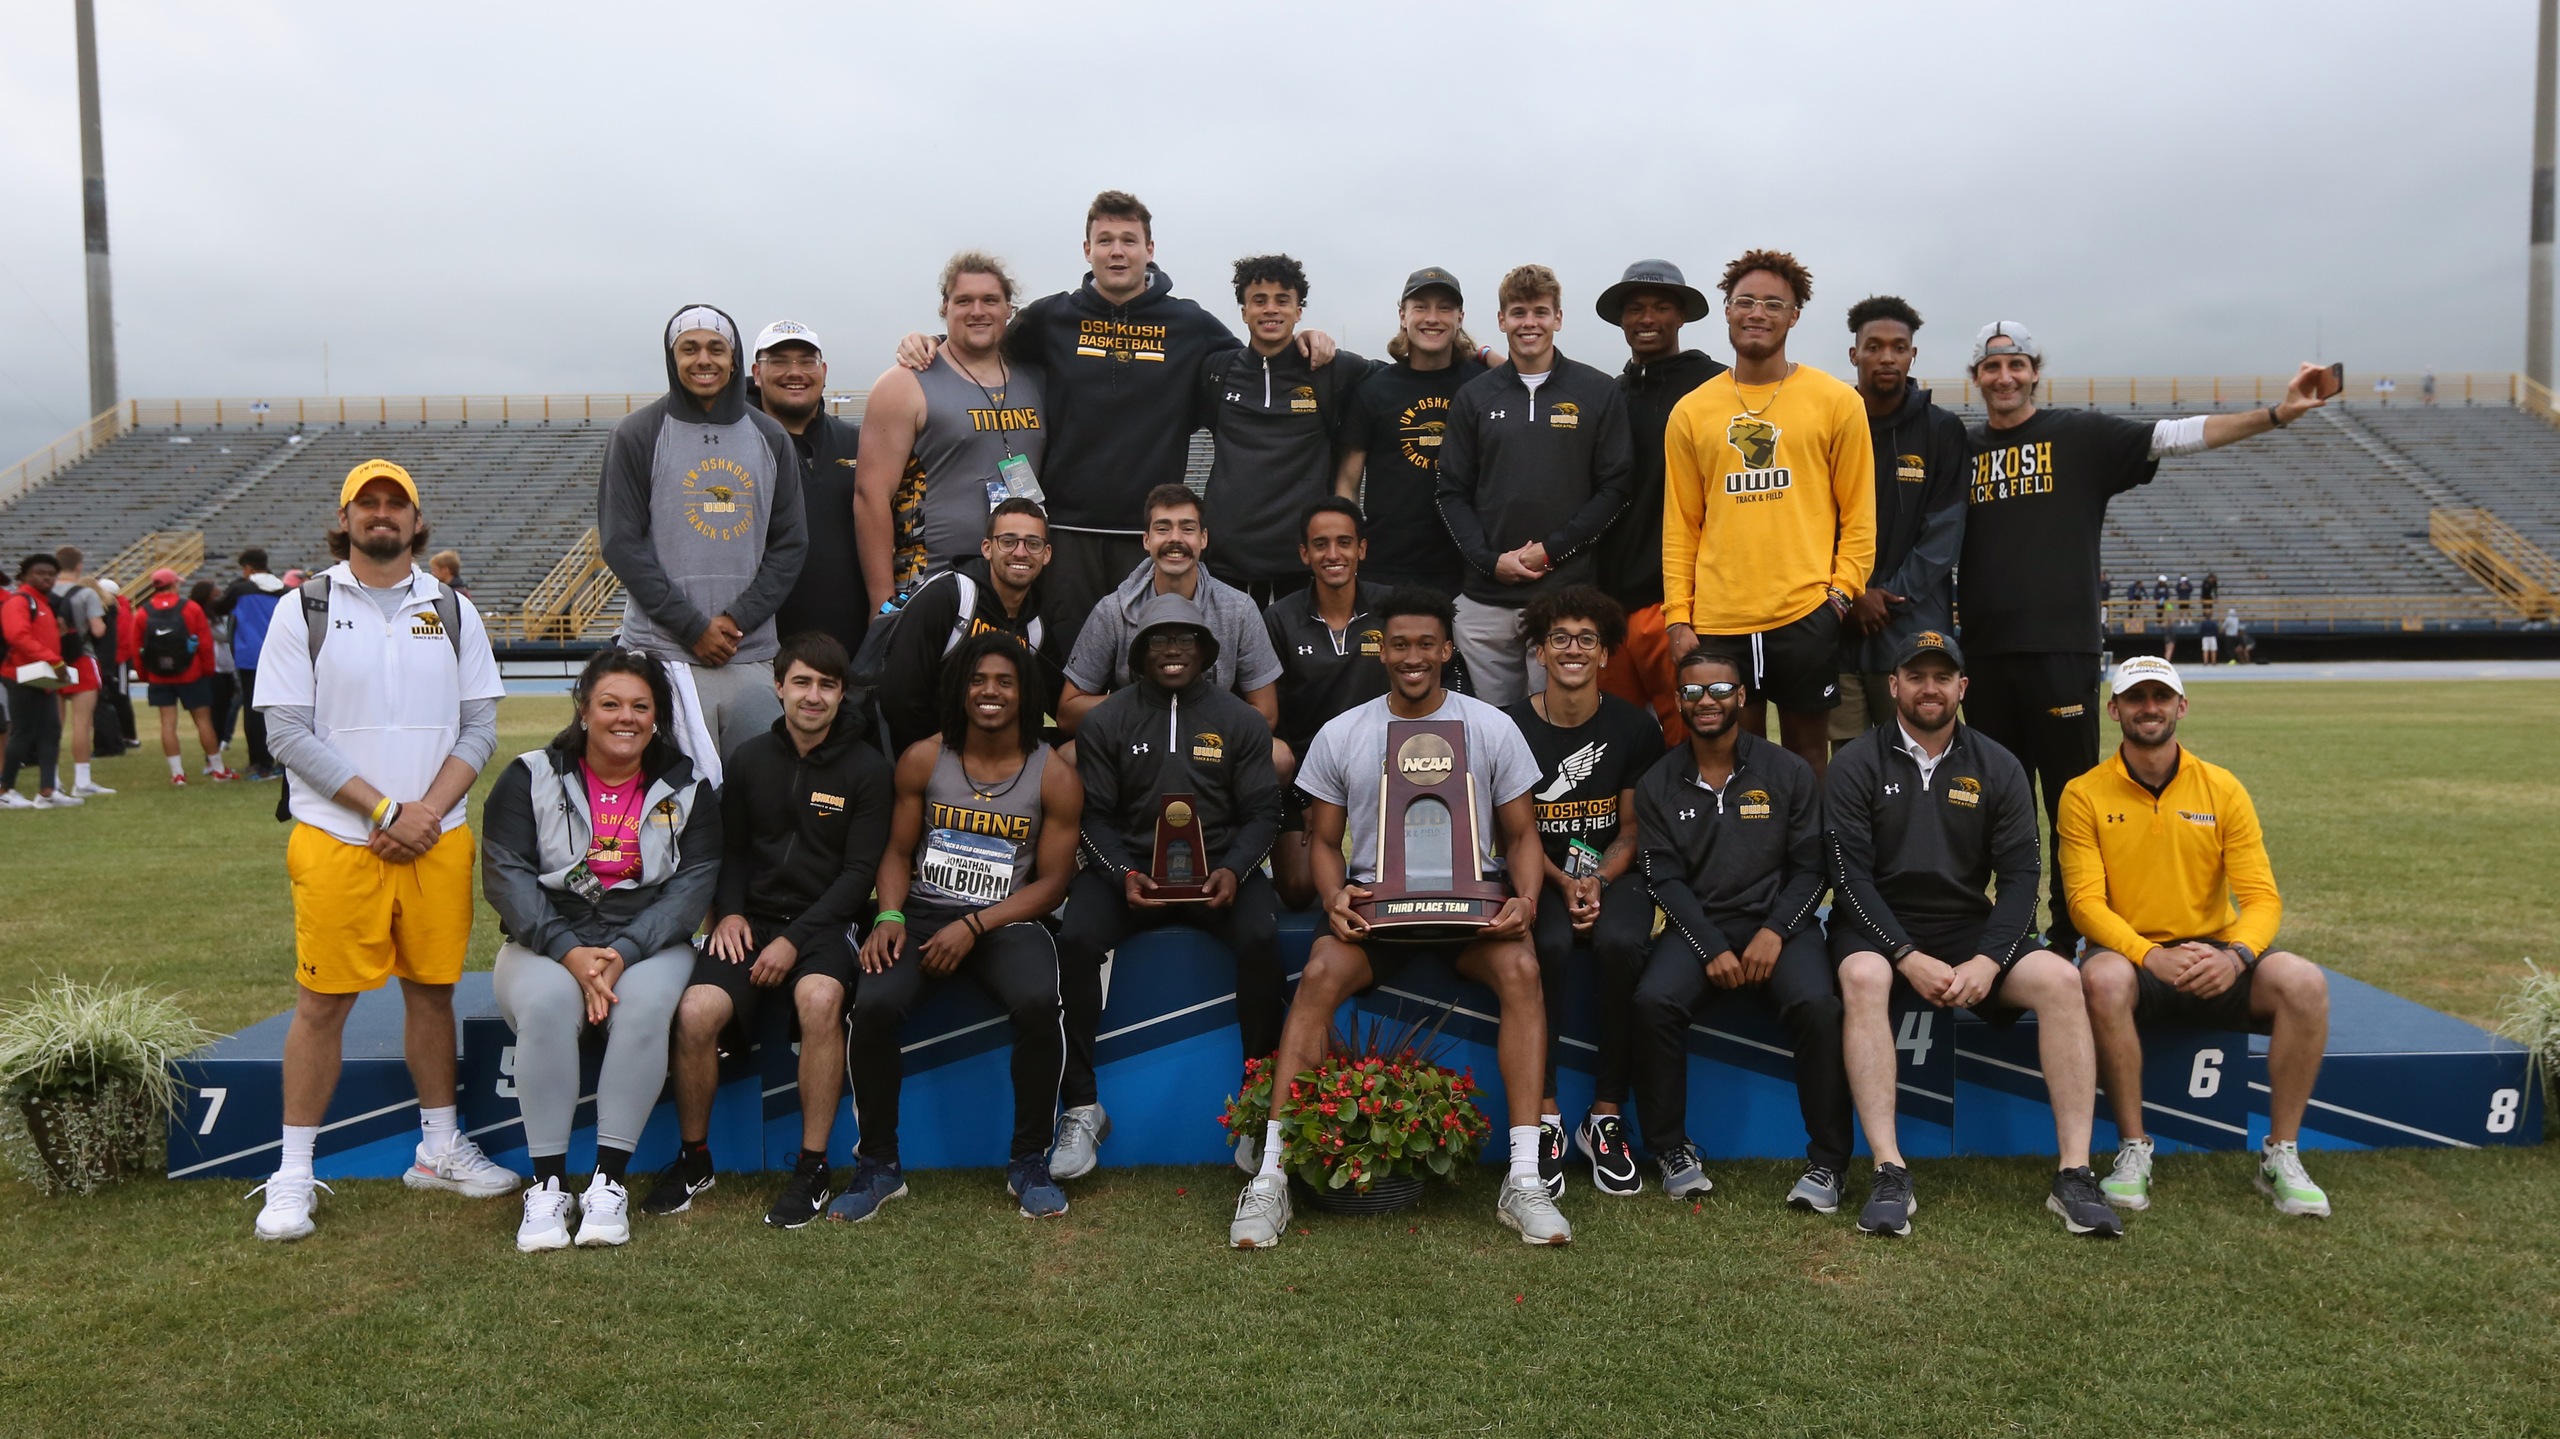 UW-Oshkosh owns five top-three finishes at the NCAA Division III Outdoor Championship, including a title in 2009.